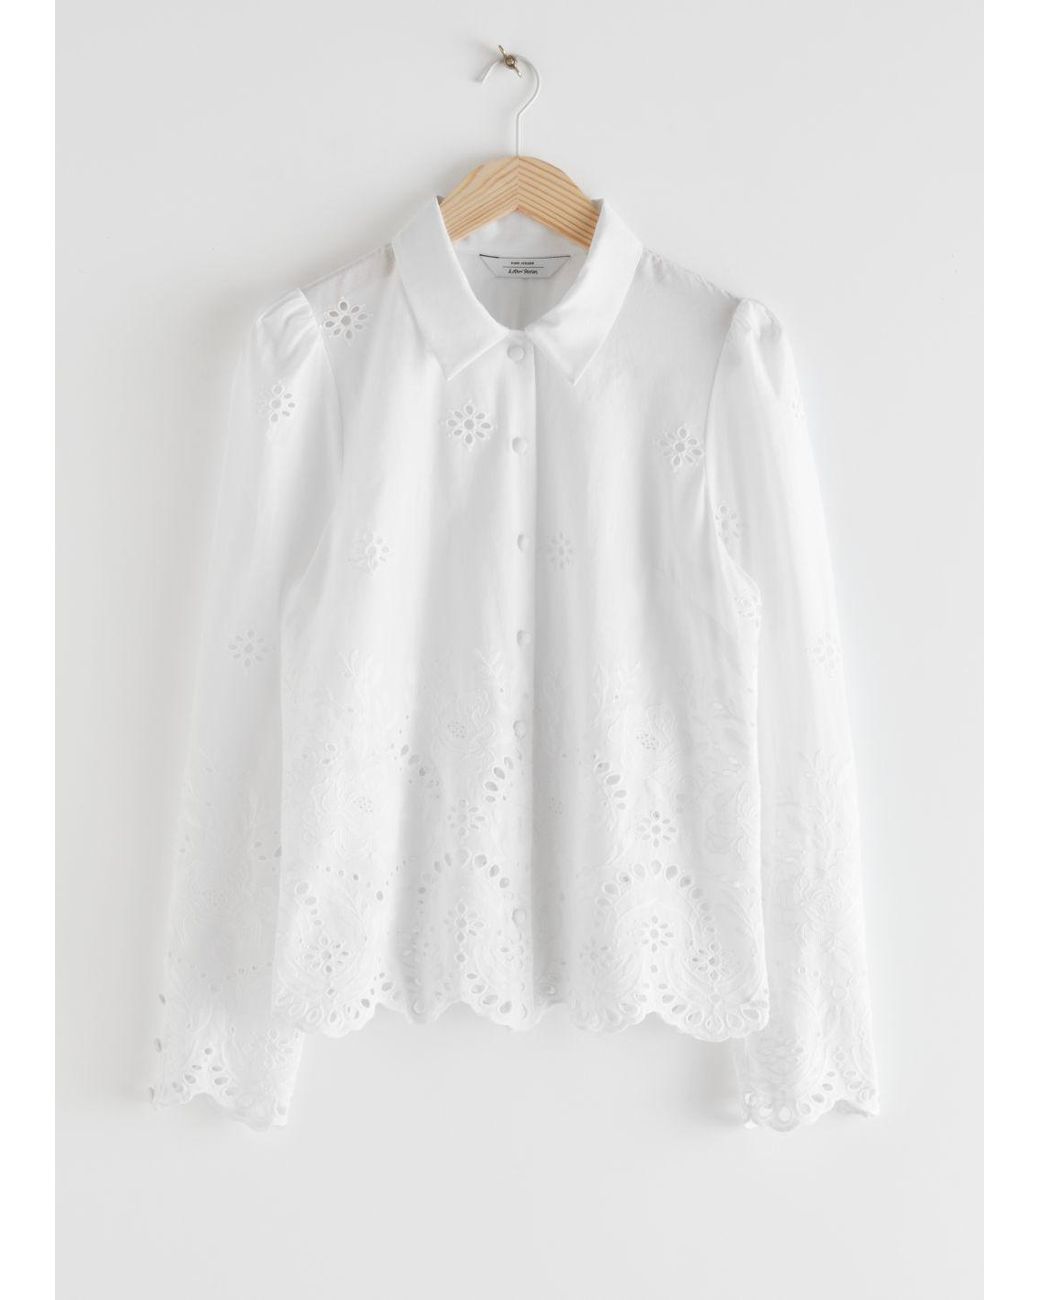 & Other Stories Broderie Anglaise Blouse in White | Lyst